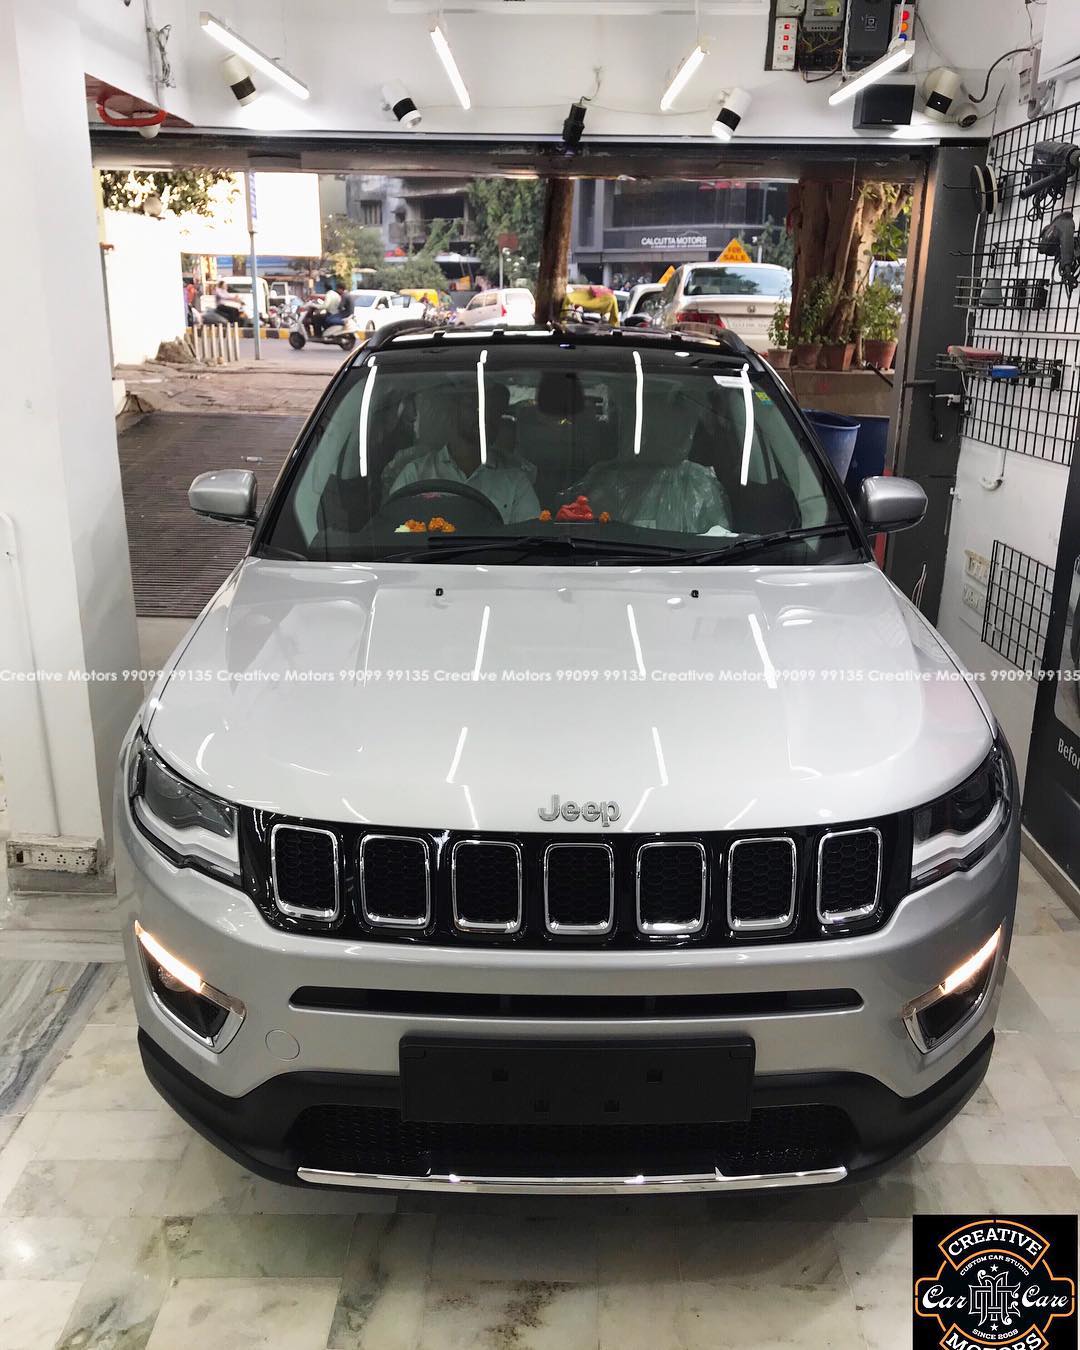 #JEEP #COMPASS #Silver got the #Best #Ceramic Treatment at ‘’#Creative #Motors’’ #Ceramic Coat #Benefits: ♦Gives Additional Gloss/Shine ♦Protects Paint from Fading ♦No Ageing Effect ♦Removes Hairline Scratches & Water-spots ♦Water & Dust Repellent ♦Easy to Clean & Maintain ♦No need to Wax and Polish again ♦Scratch Resistant upto 9H Hardness ♦3 Year  Protection in 3 hours 
Call or Whatsapp : +91 99099 99135 
Follow us on instagram: www.instagram.com/creativemotors 
Add: 
Creative Motors Ahmedabad 
GF 1,2 Urvashi Complex,  Nr. Calcutta Motors, Mithakhali Six Roads, Law Garden Road, Navrangpura, Ahmedabad 
9909999135 
#creativemotors #bikes #bikers #Cars #carspa #microdetailing #ceramiccoatings #coatings  #glasscoatings #waterrepellant #scratchproof #minicooper #supercars #Rajkot #ahmedabad #Jeep #compass #qualityovereverything